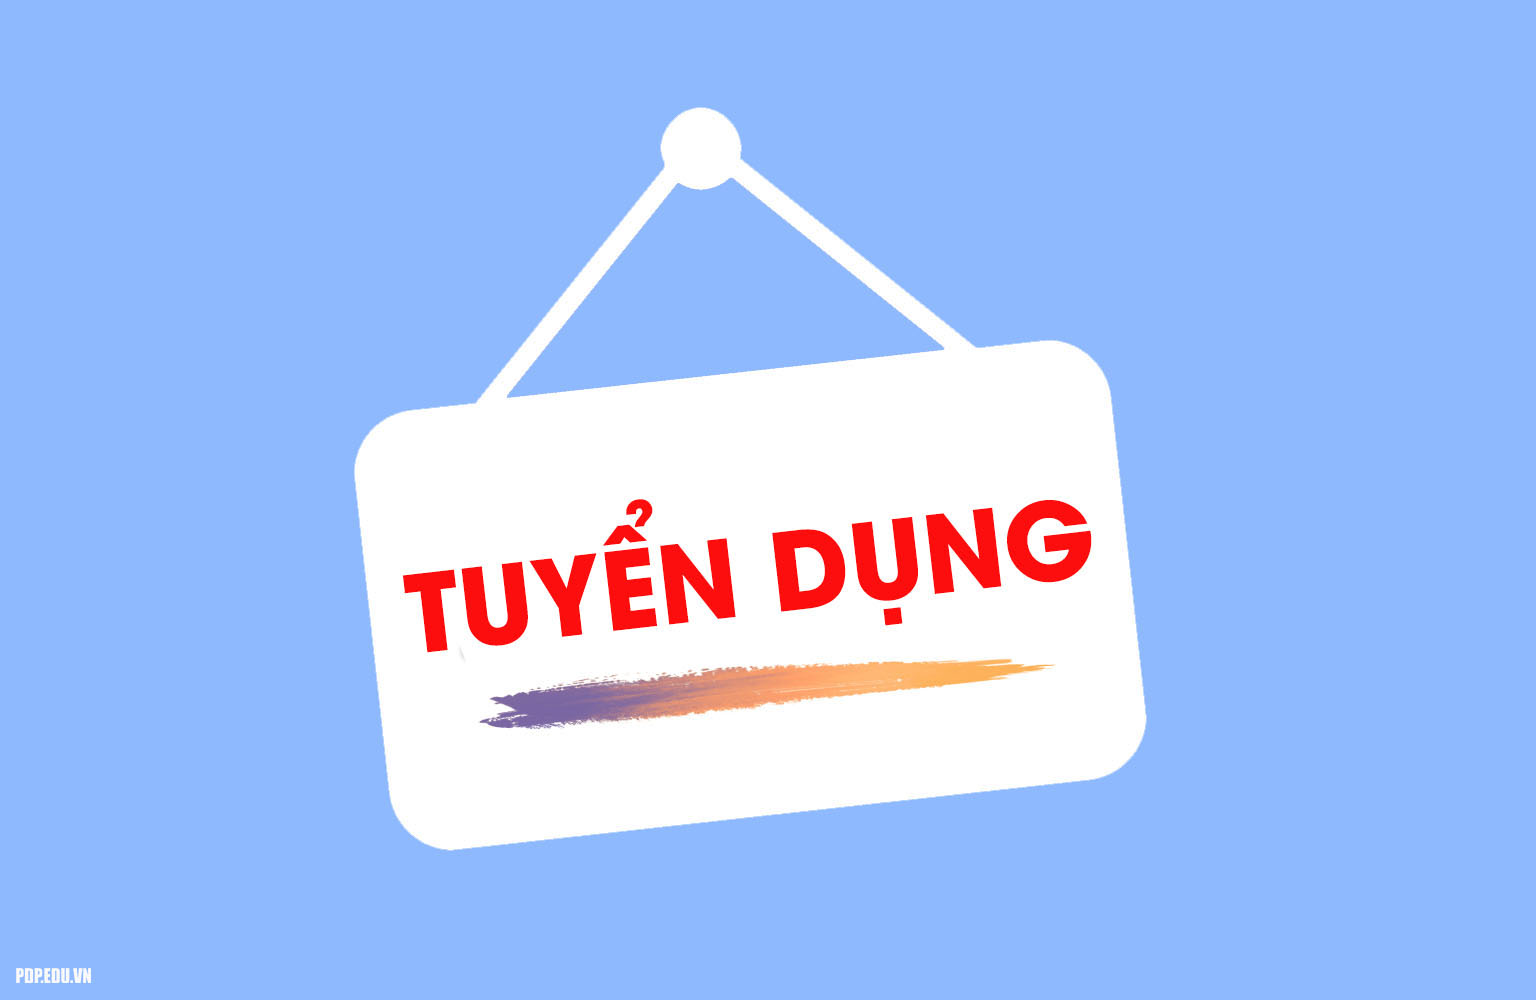 DTSVN Recruitment: Project Manager